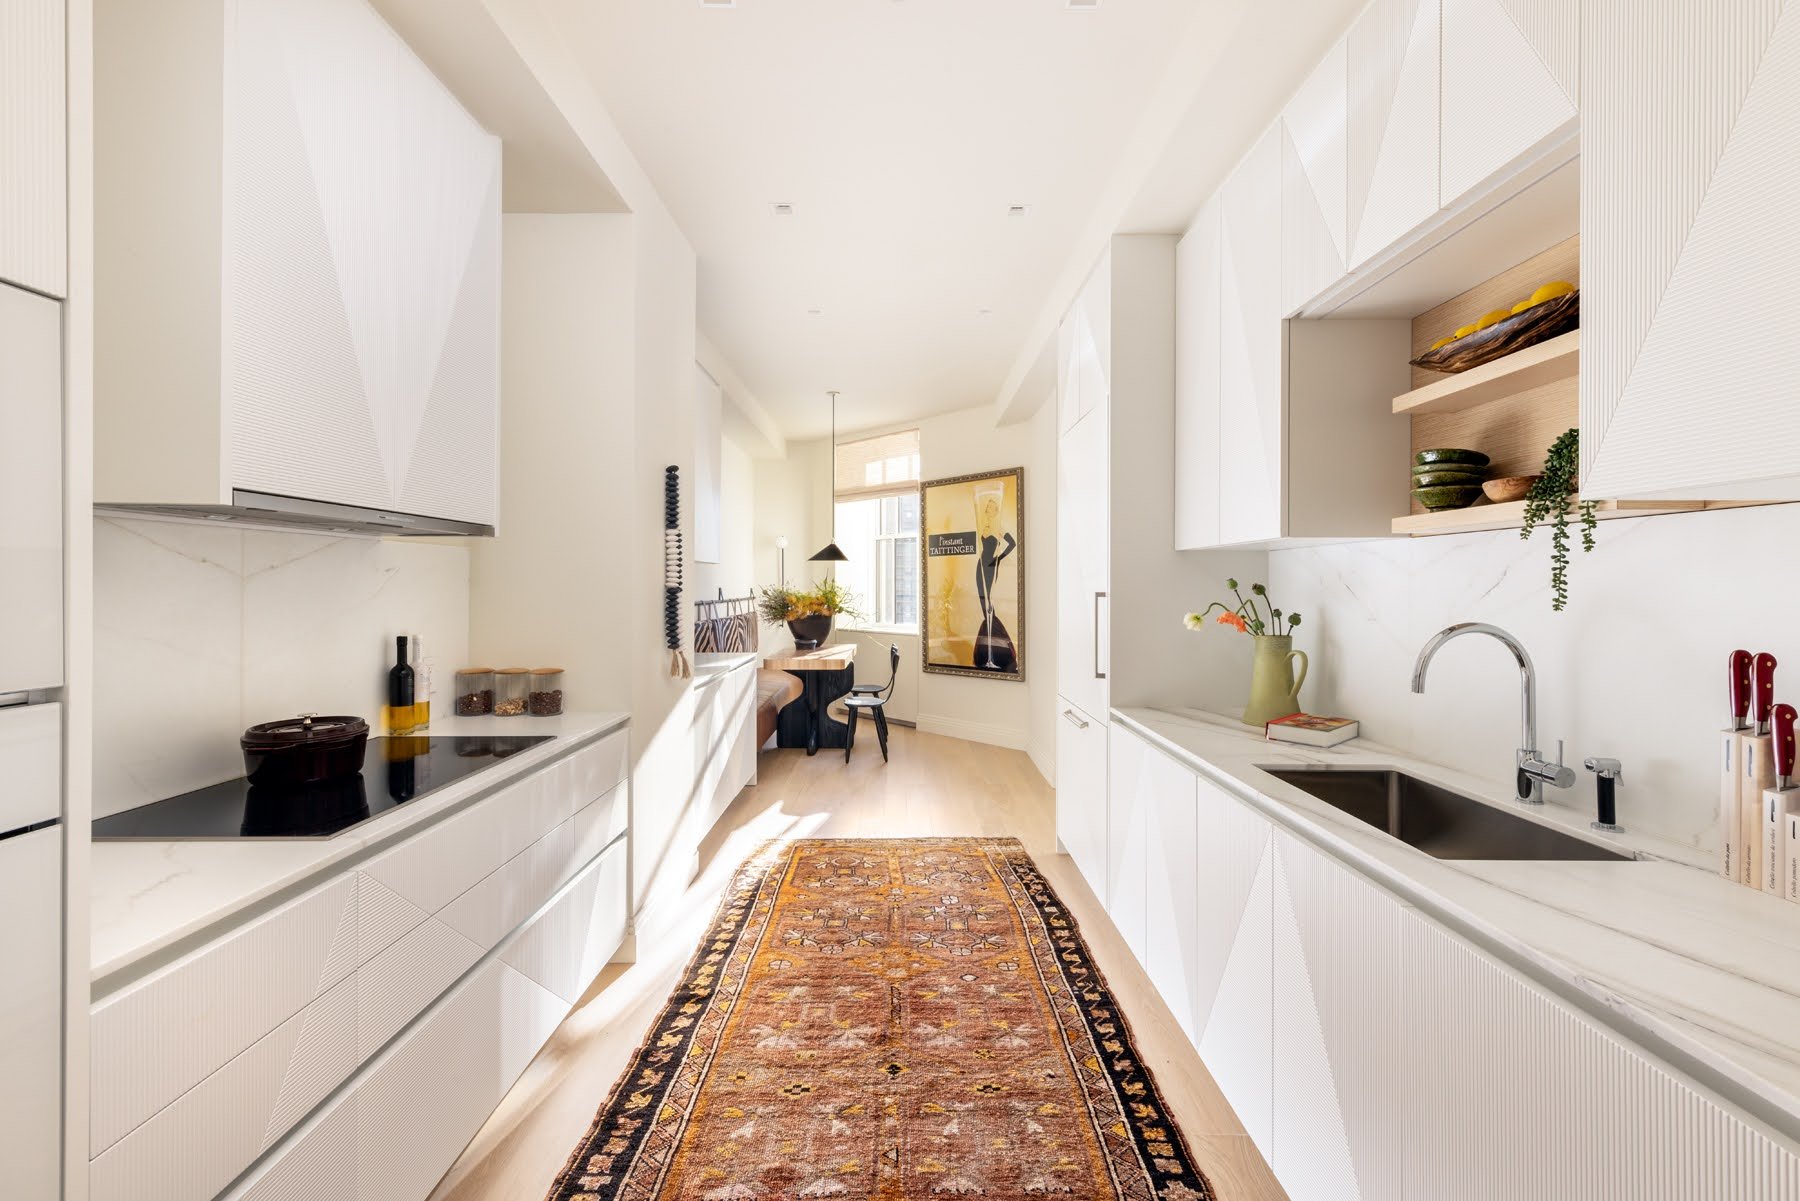 Model Kitchen and living areas at One Wall Street, staged by Yellow House - Photo by Evan Joseph for Macklowe Properties